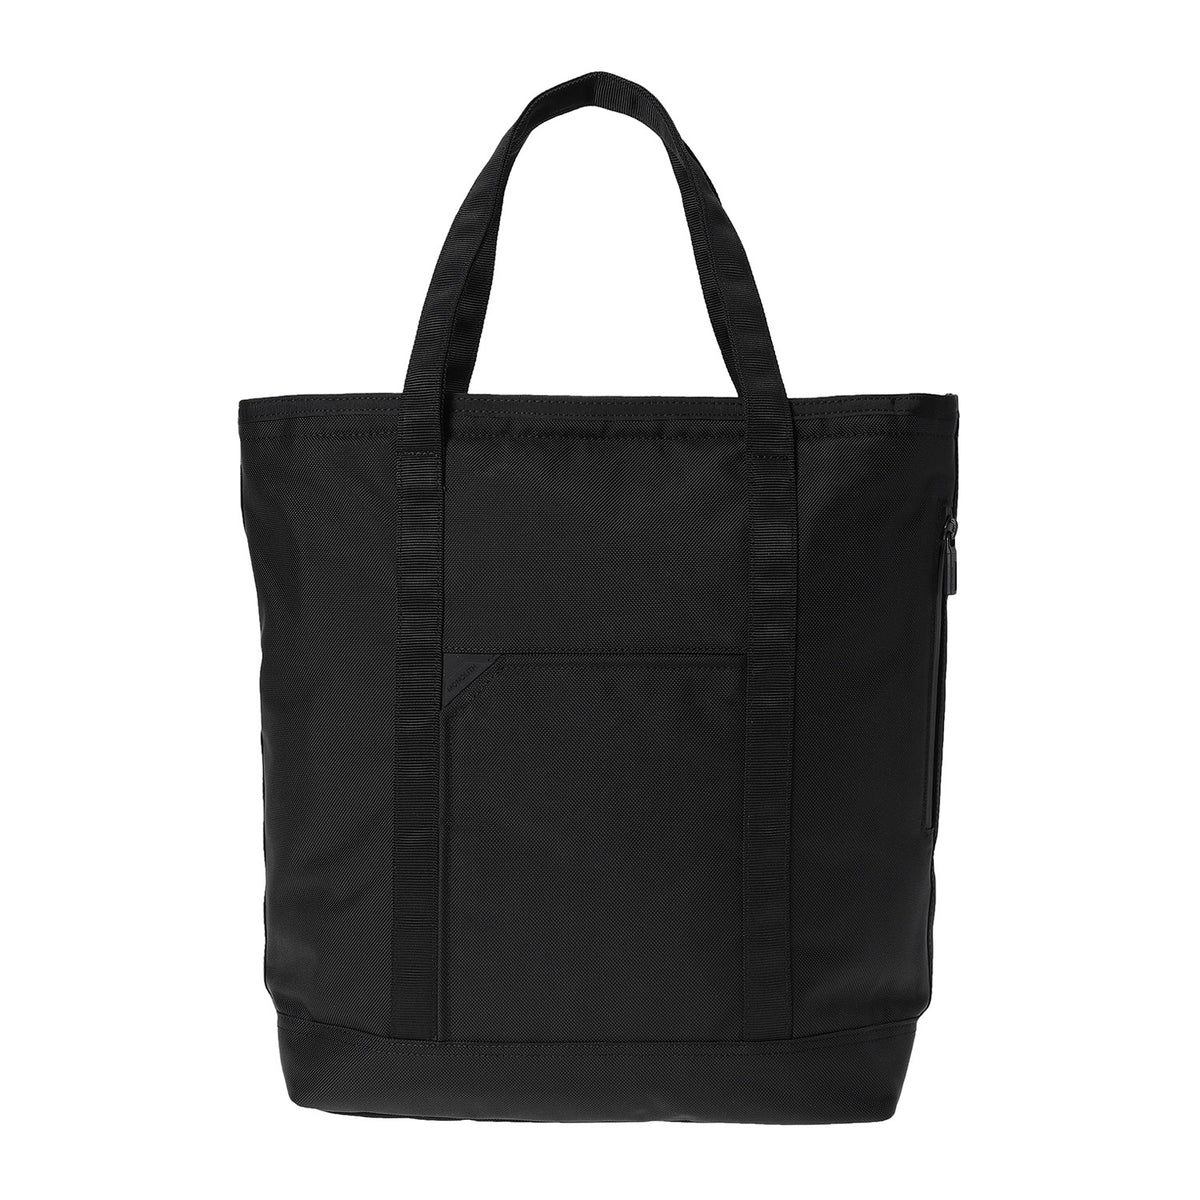 Tote Office M